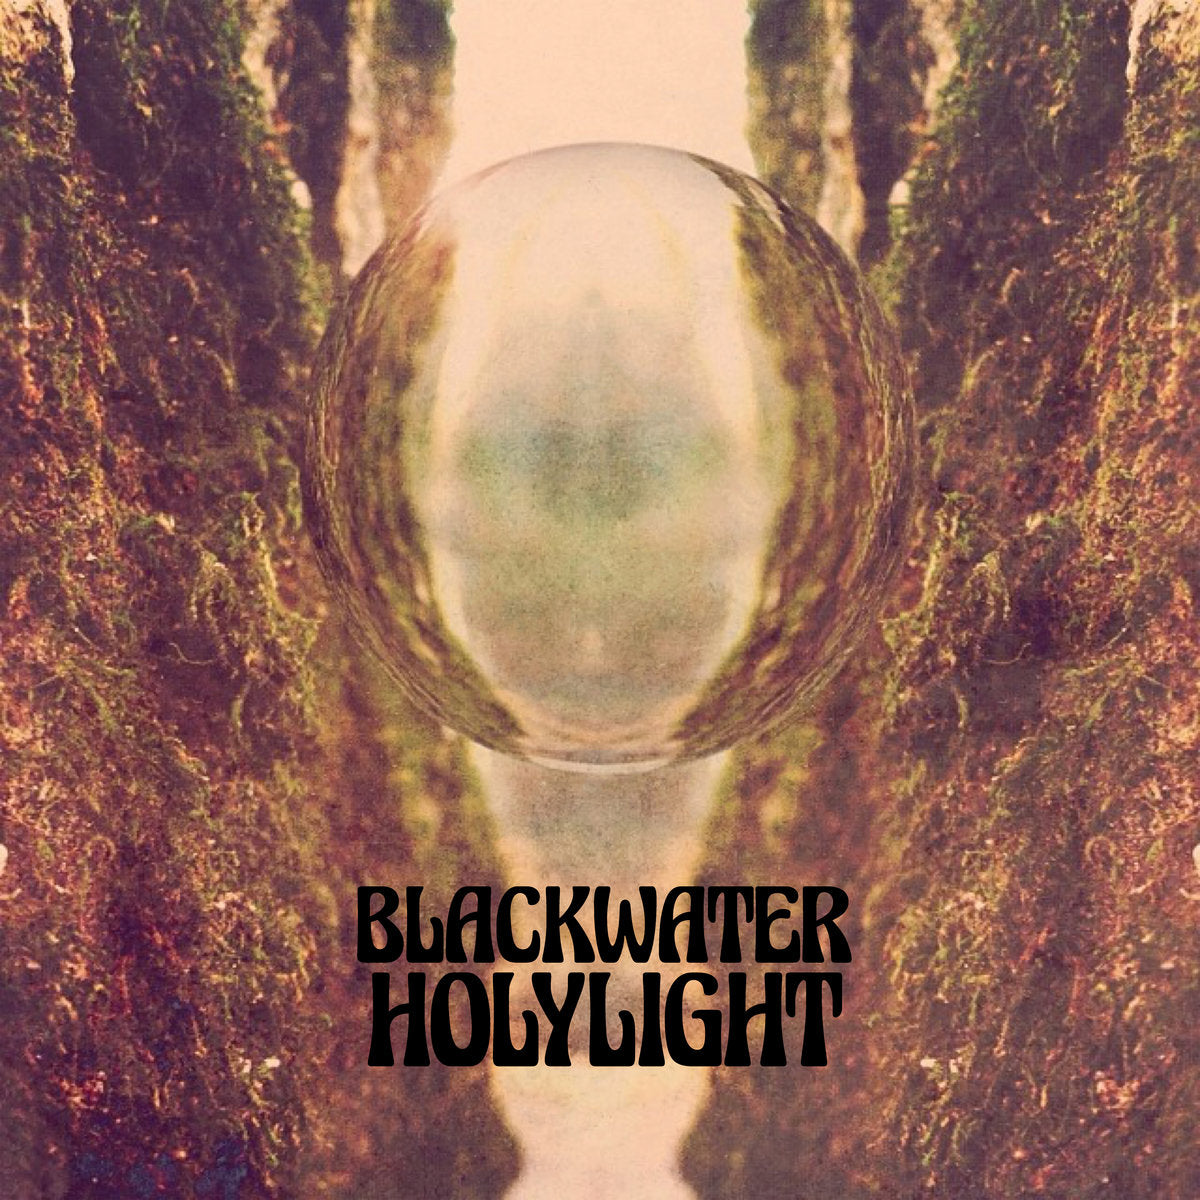 Arcade Sound - Blackwater Holylight - Blackwater Holylight front cover